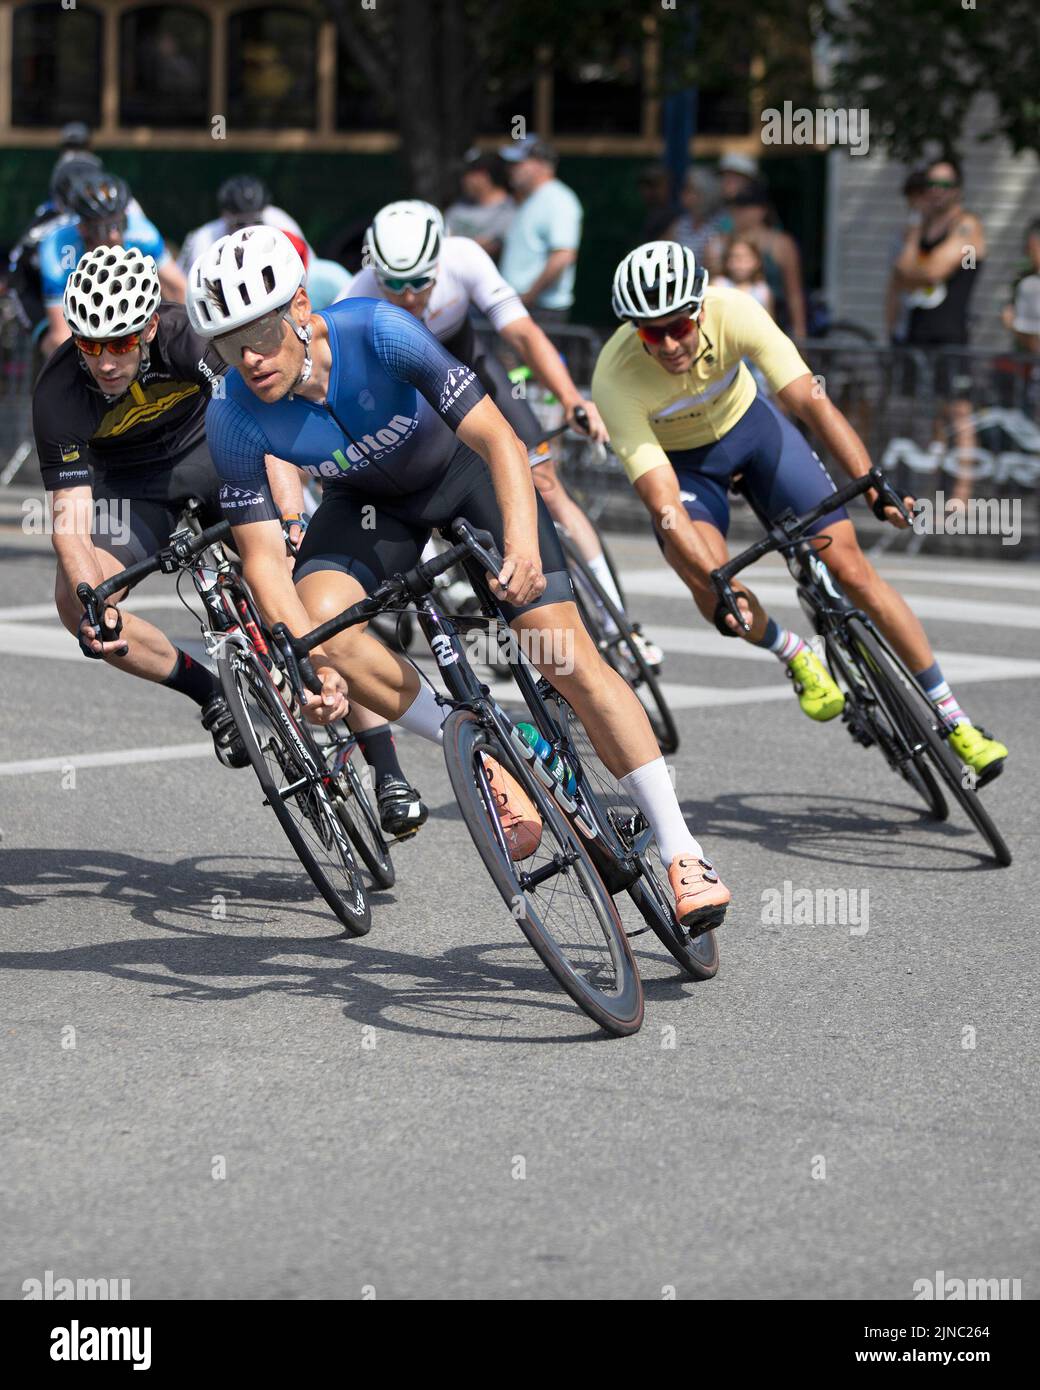 Bicycle racers in the peloton round a corner in the Criterium, a fast bike race where the cyclists ride on a circuit of city streets, Calgary, Canada Stock Photo